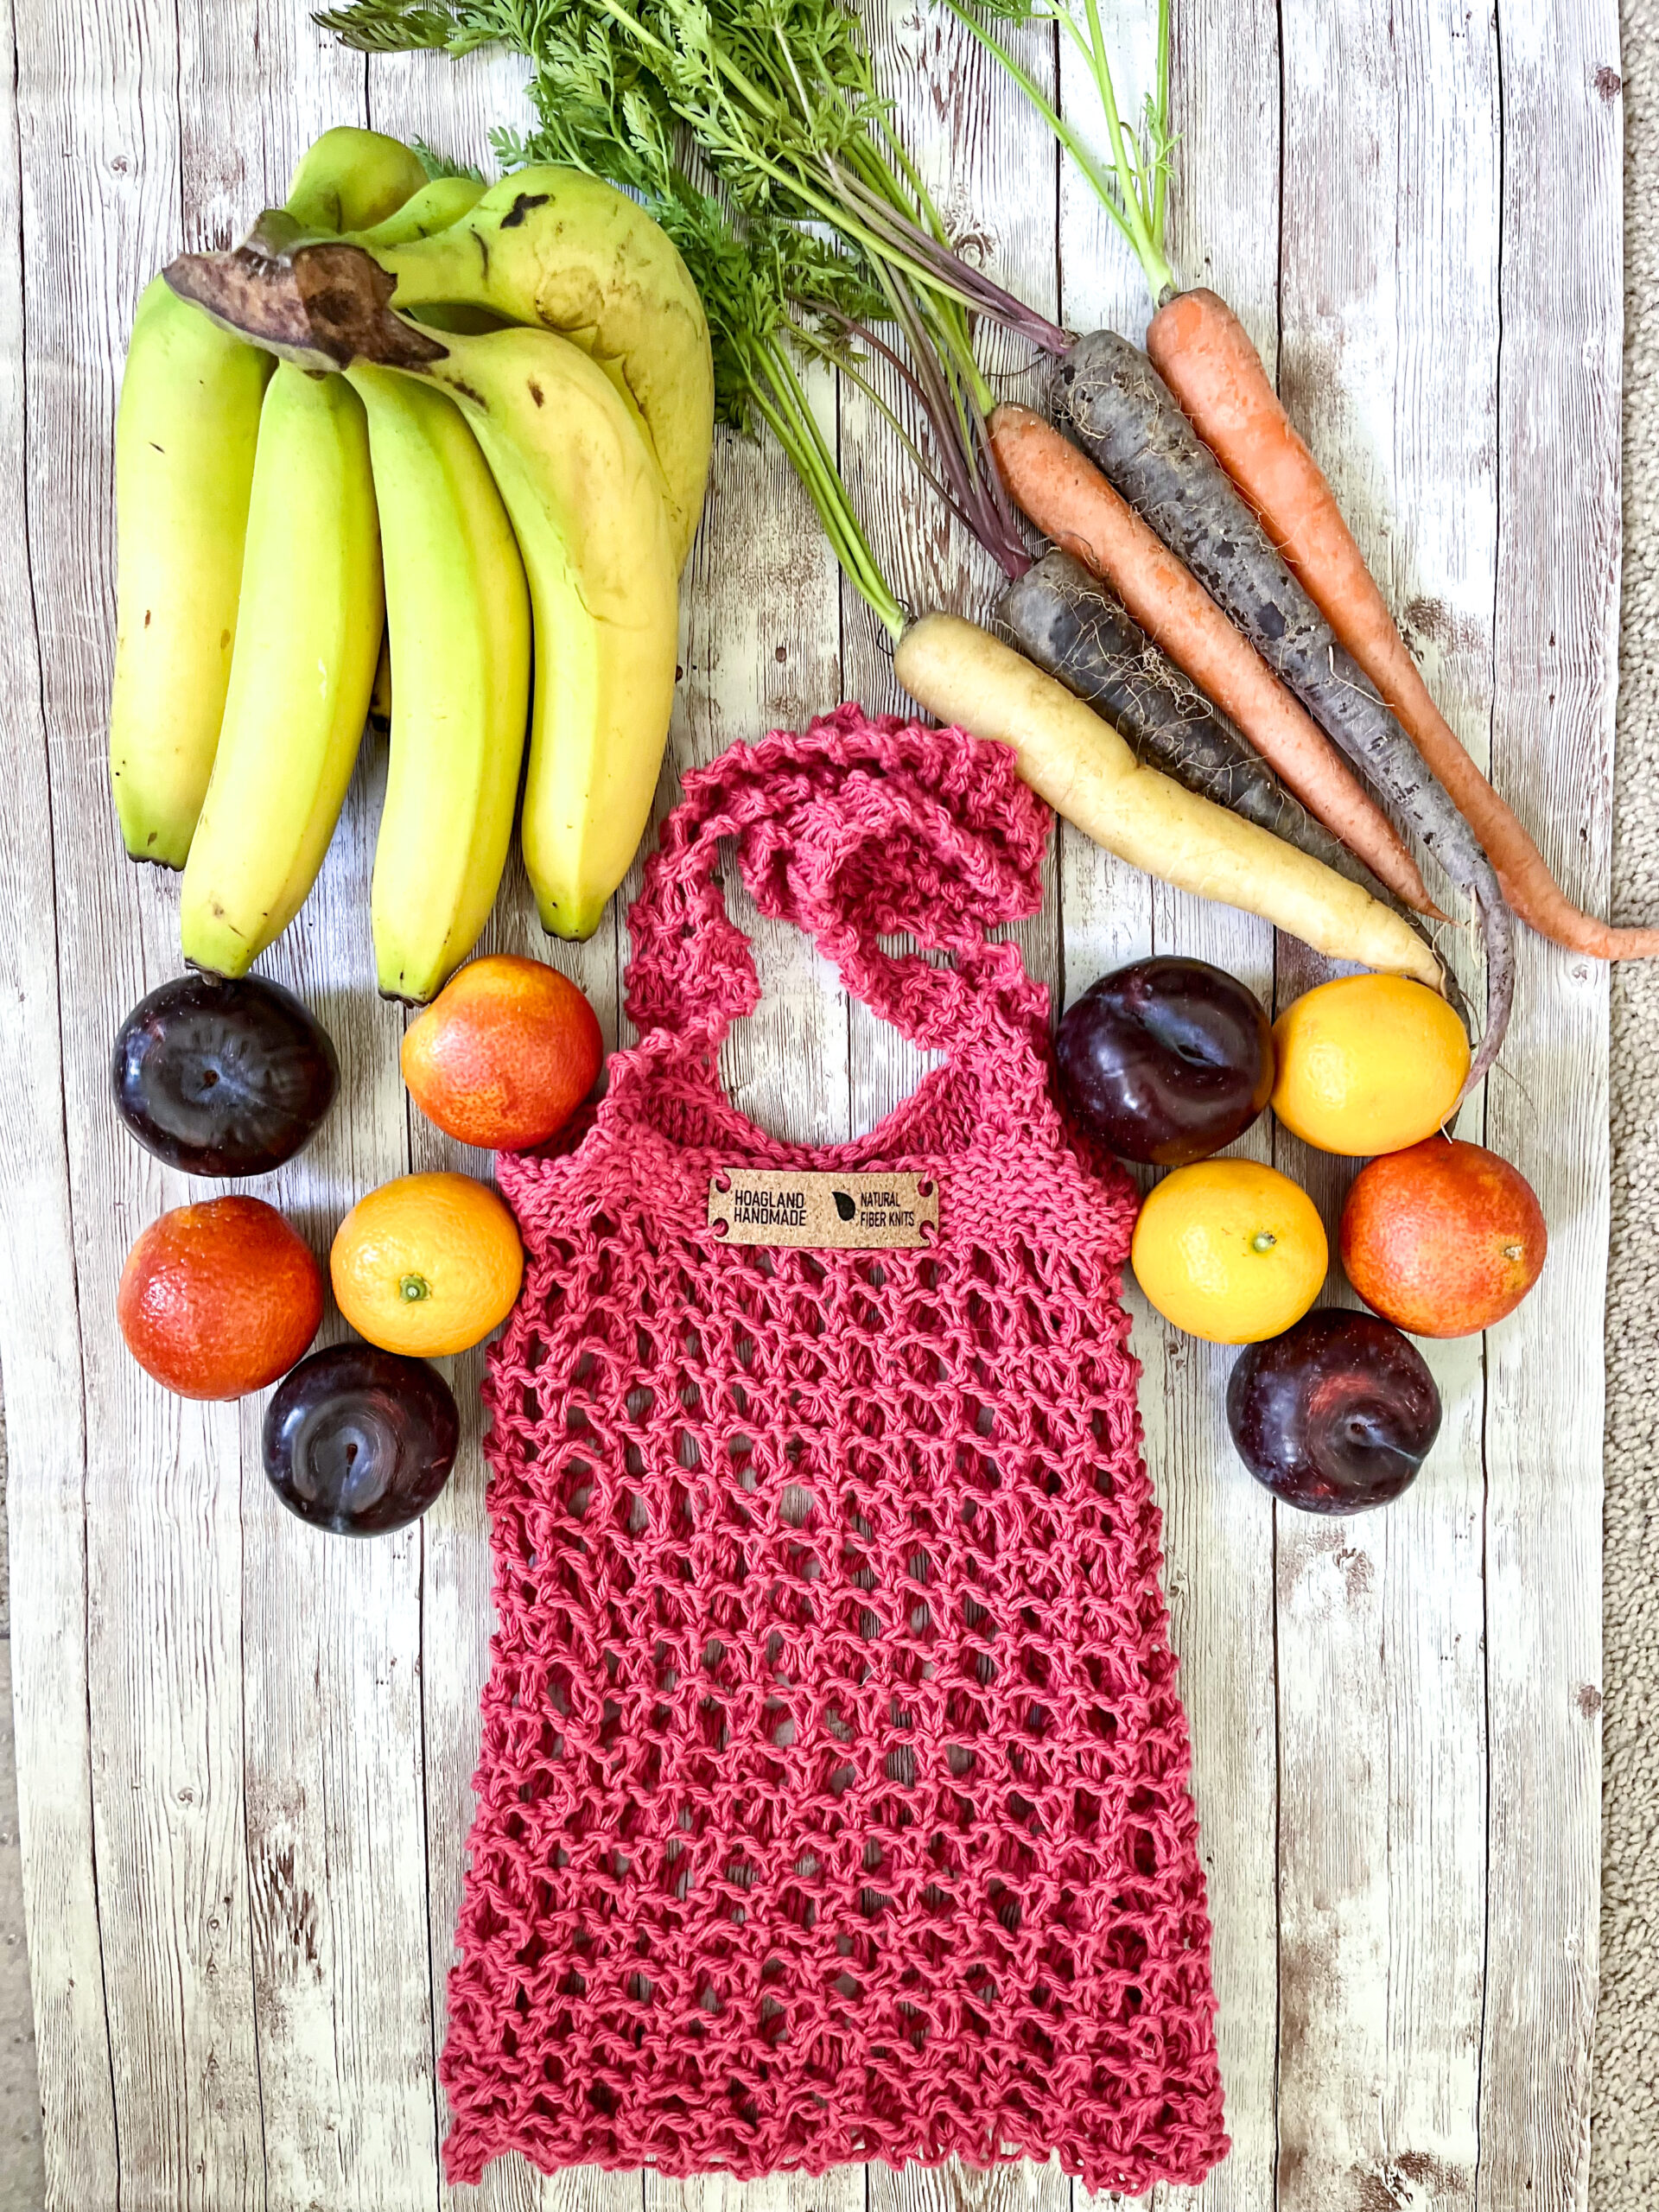 A pink recycled cotton mesh tote bag is surrounded by bananas, rainbow carrots, plums, oranges, and blood oranges